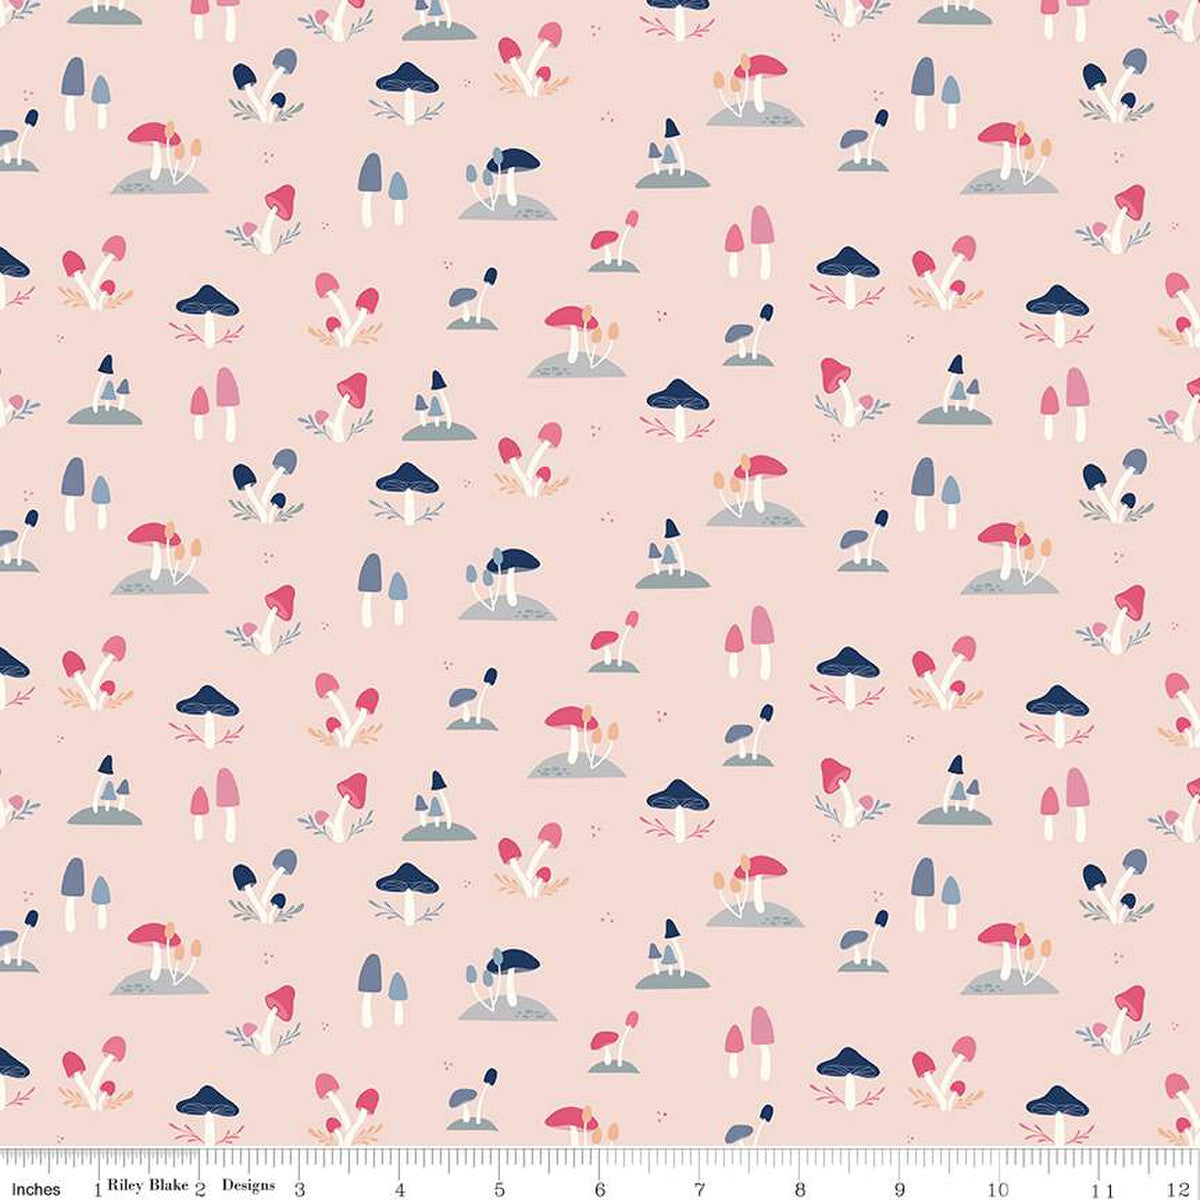 South Hill by Fran Gulick for Riley Blake designs fabric clusters of toadstools mushrooms in pink and navy on gray mound on blush pink background tone on tone quilt weight fabric for quilting sewing garments clothing 